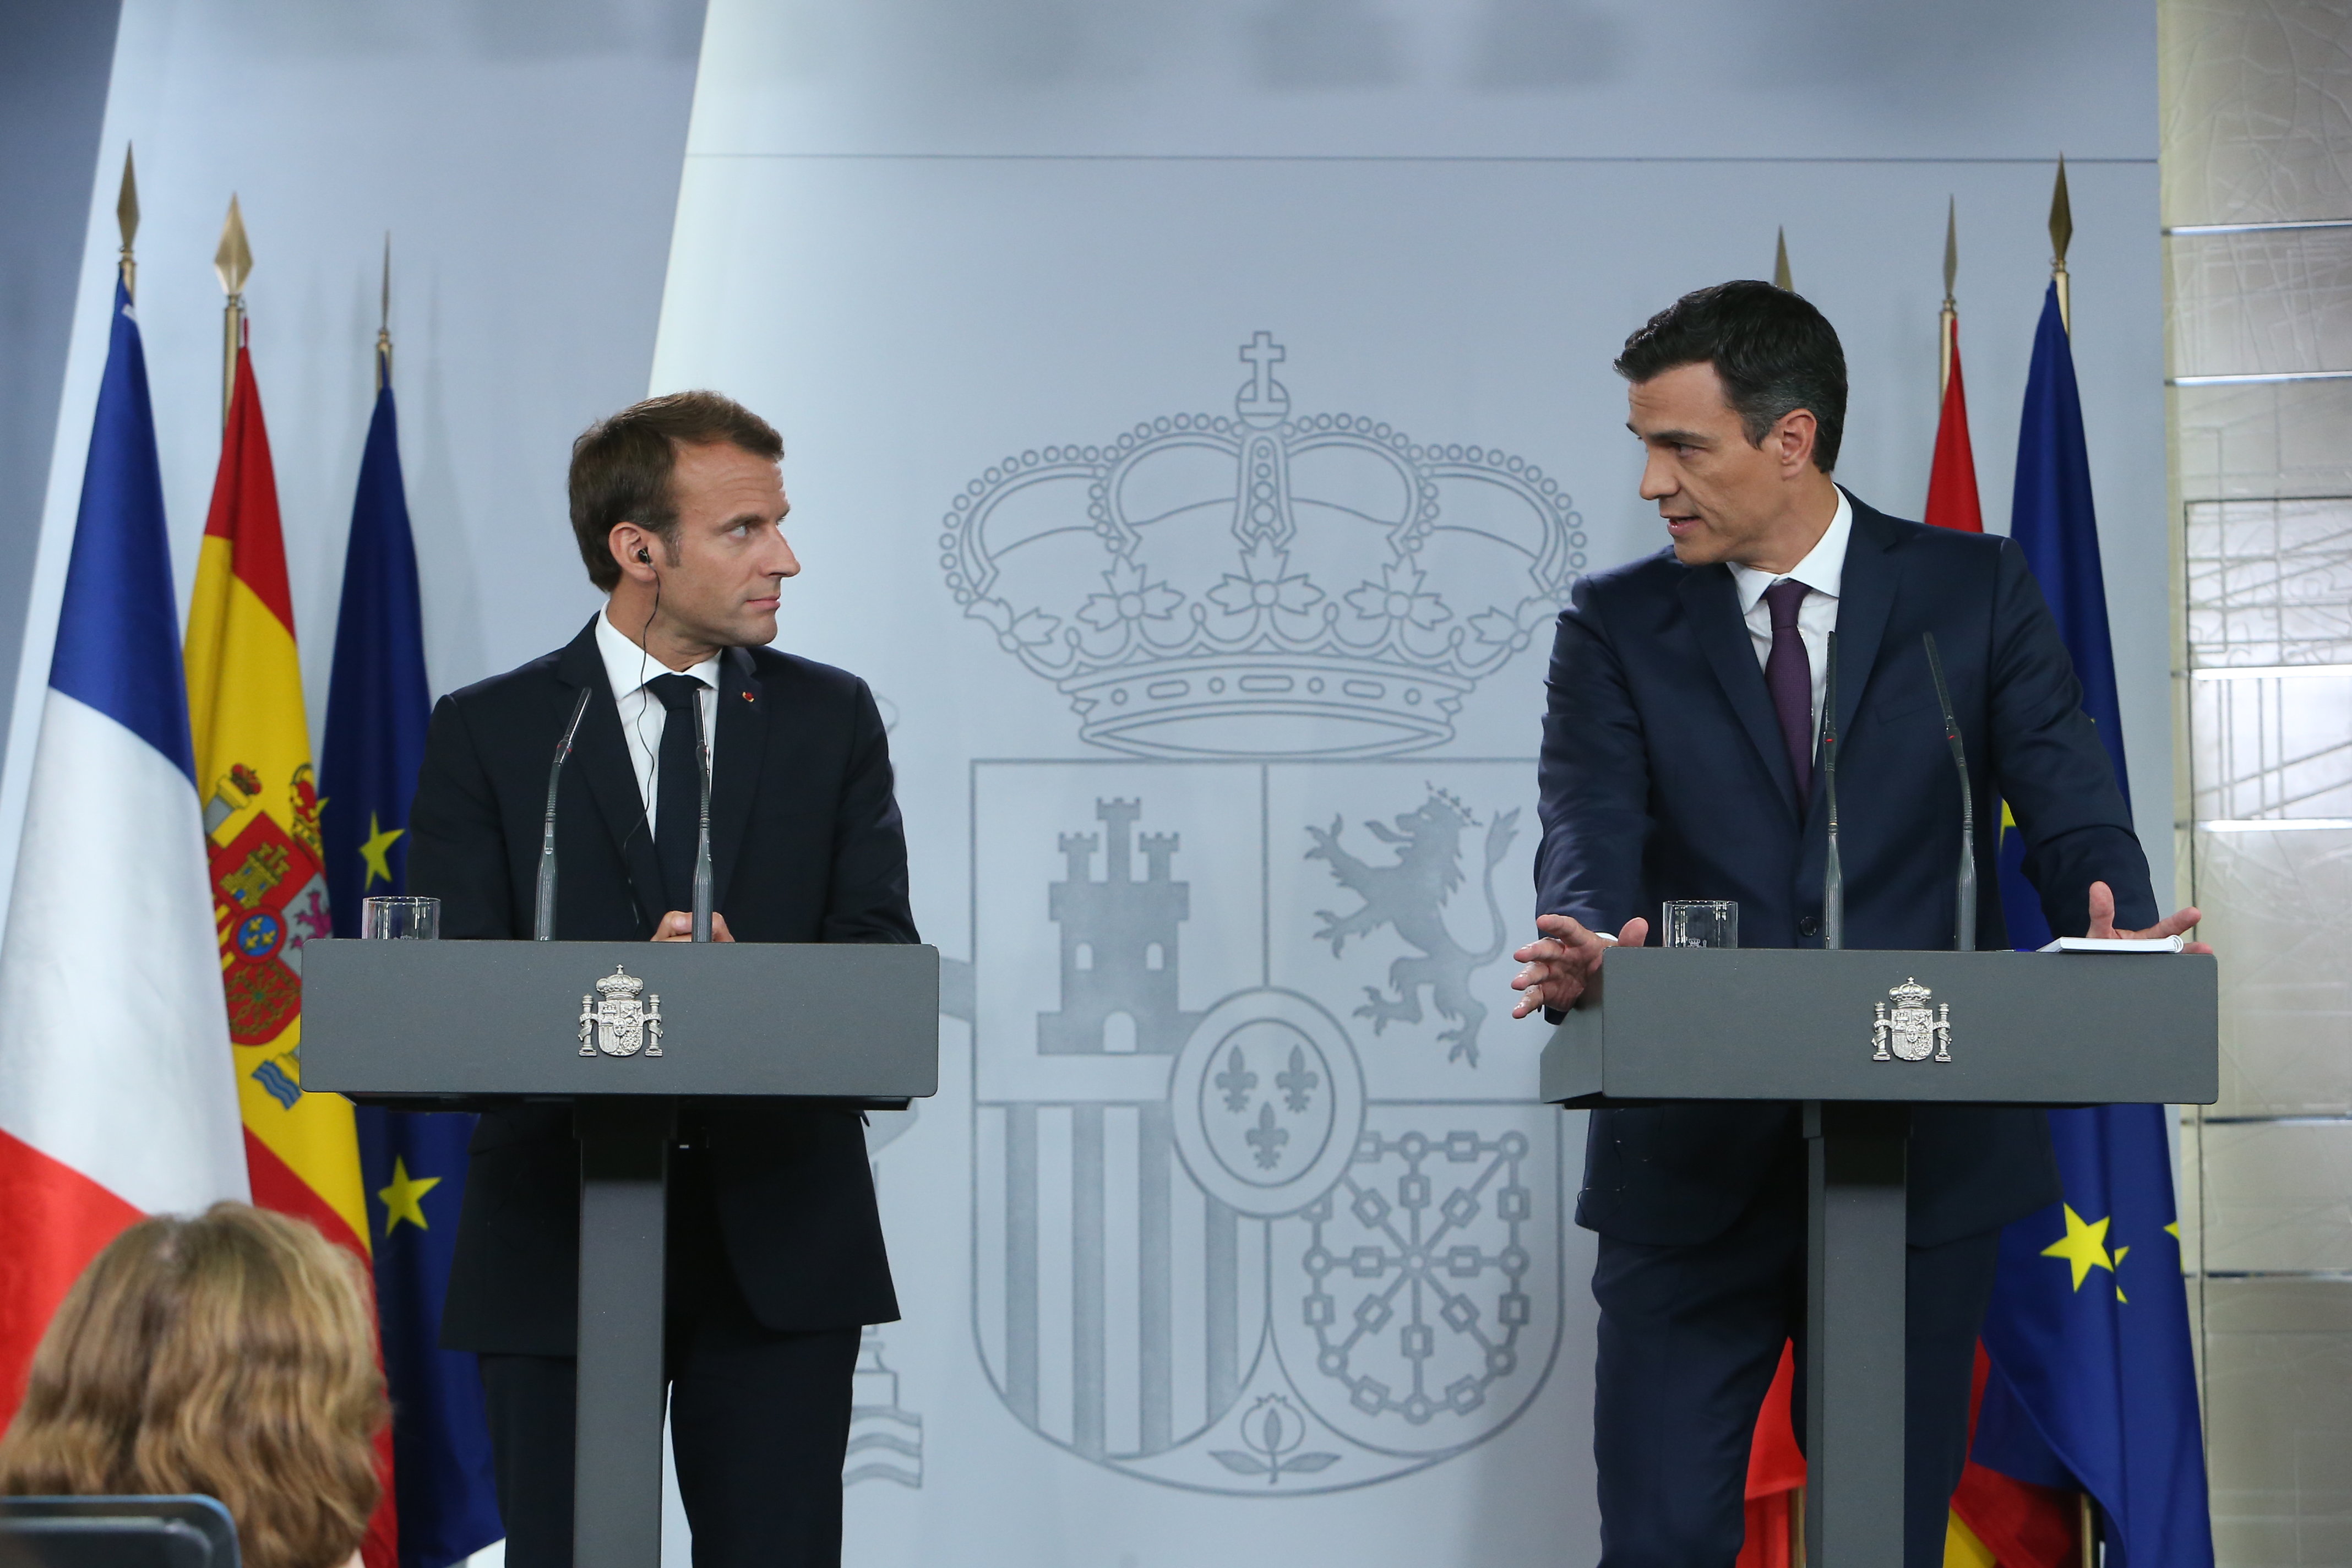 The French president, Emmanuel Macron, with the Spanish leader, Pedro Sánchez, in Madrid in July 2018 (by Fernando Calvo/Pool Moncloa)